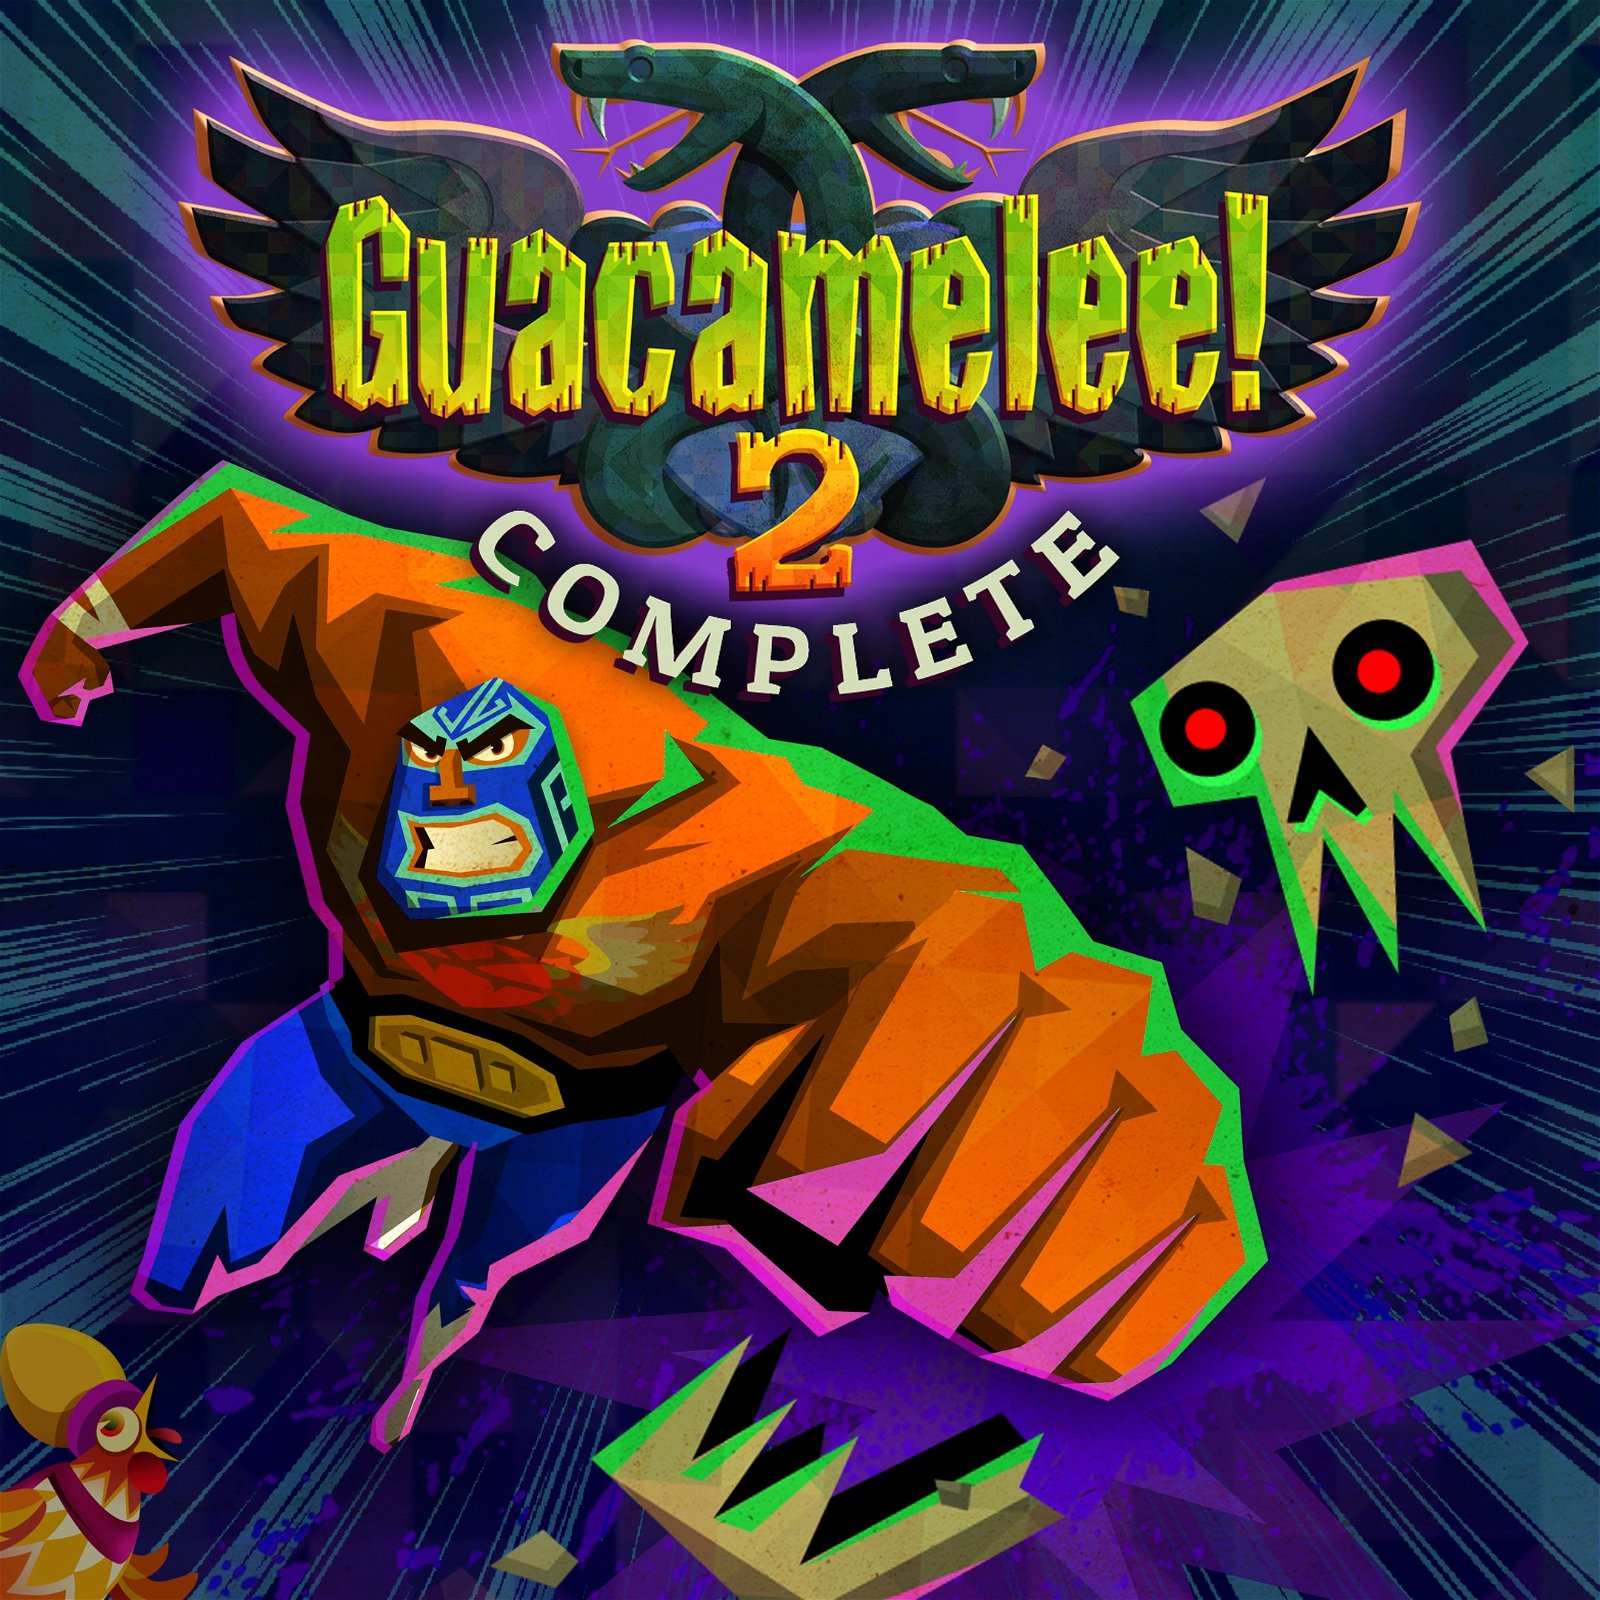 Image of Guacamelee! 2 Complete